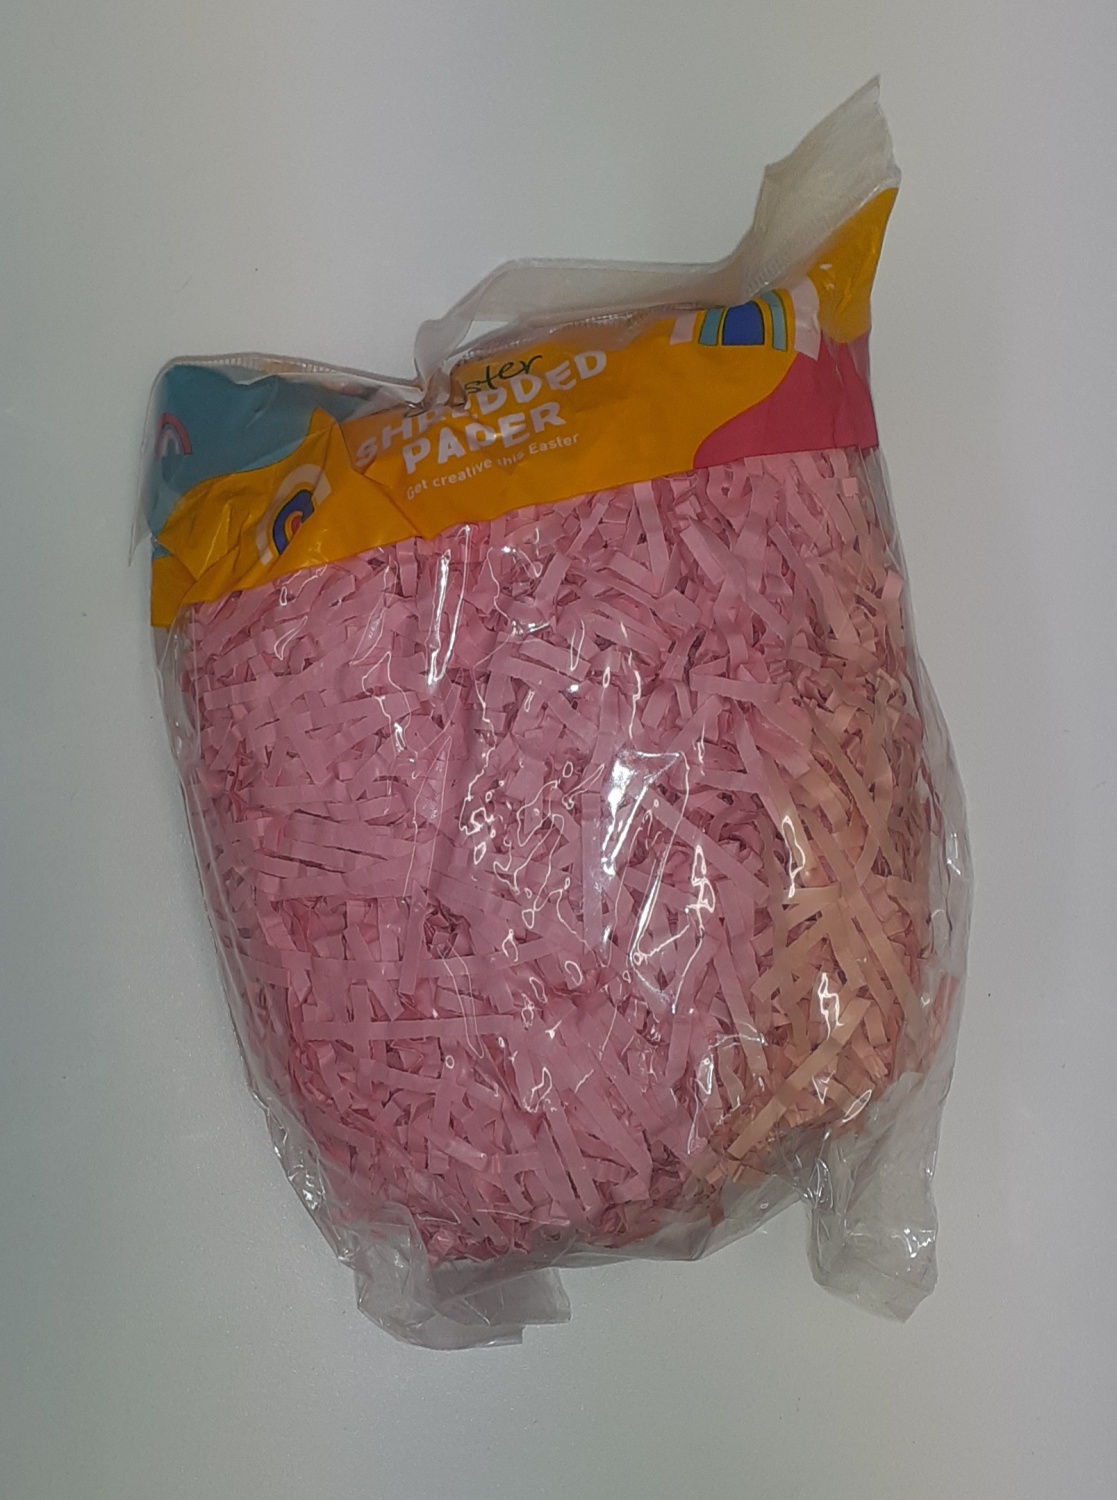 George Easter Pink Shredded Paper RRP 1 CLEARANCE XL 59p or 2 for 1